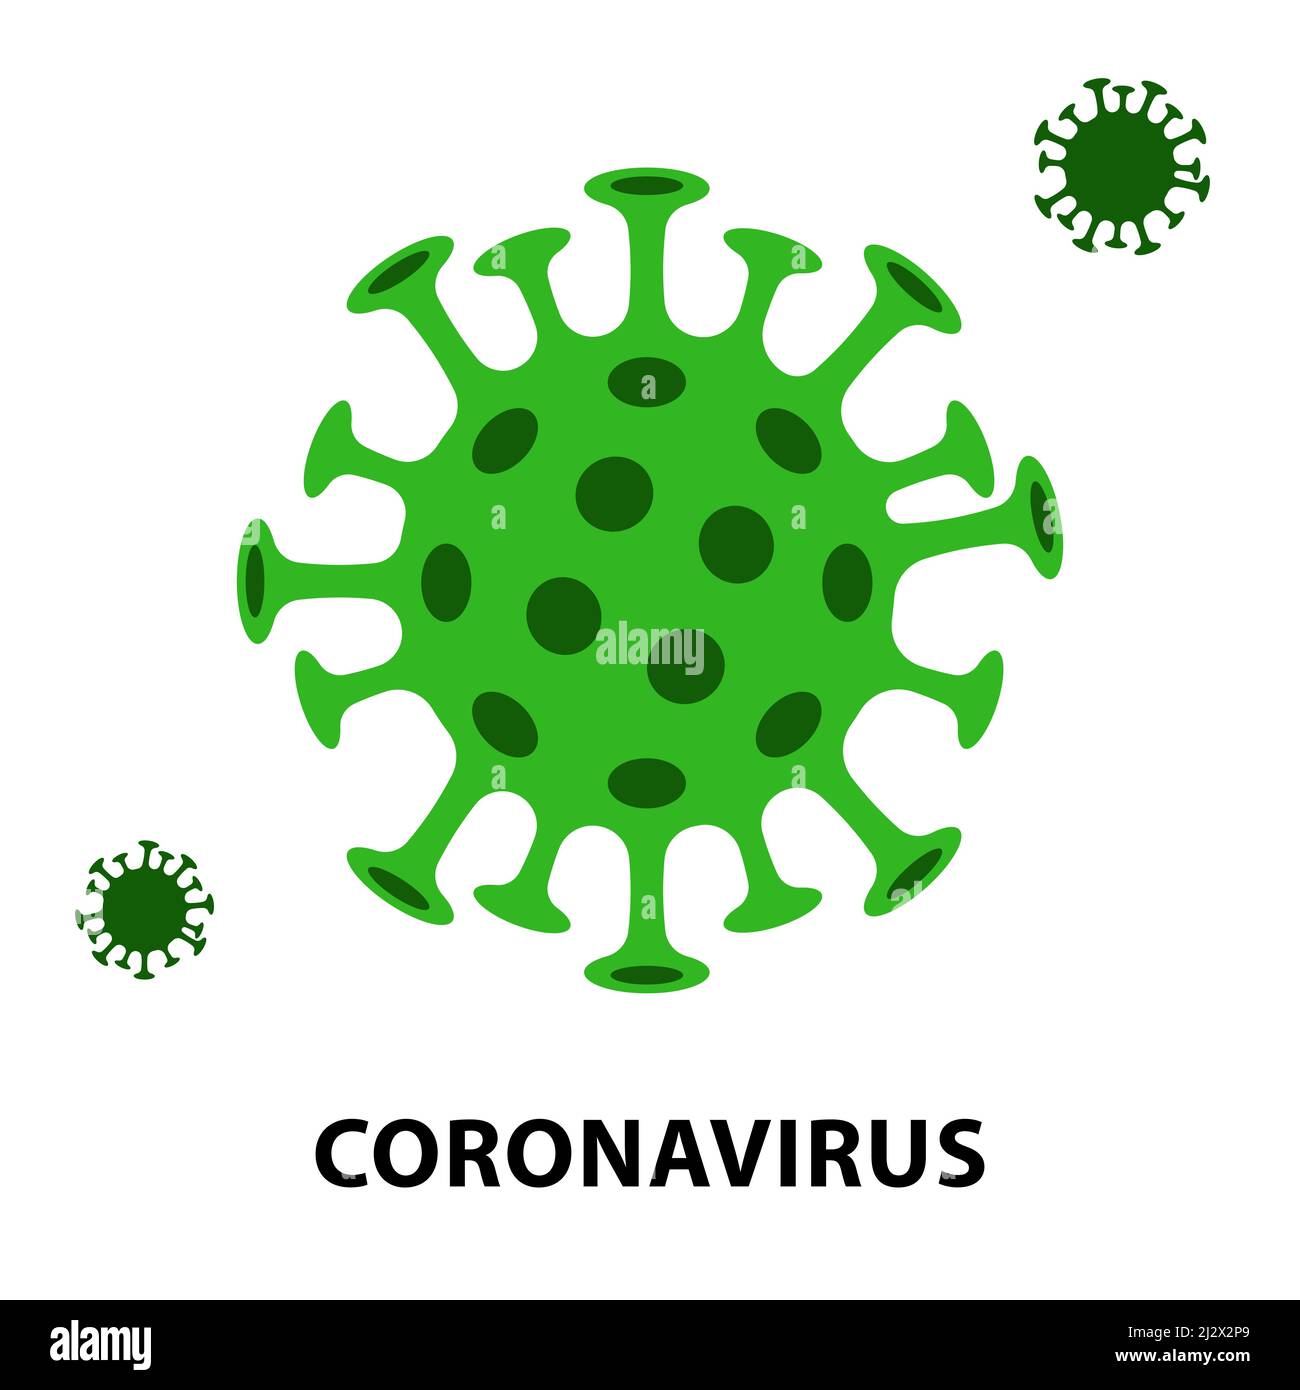 Covid-19 under the microscope. Cartoon virus from scanning electron microscope. Spread of viruses by airborne droplets. Symbol of pandemic, lockdown, Stock Vector